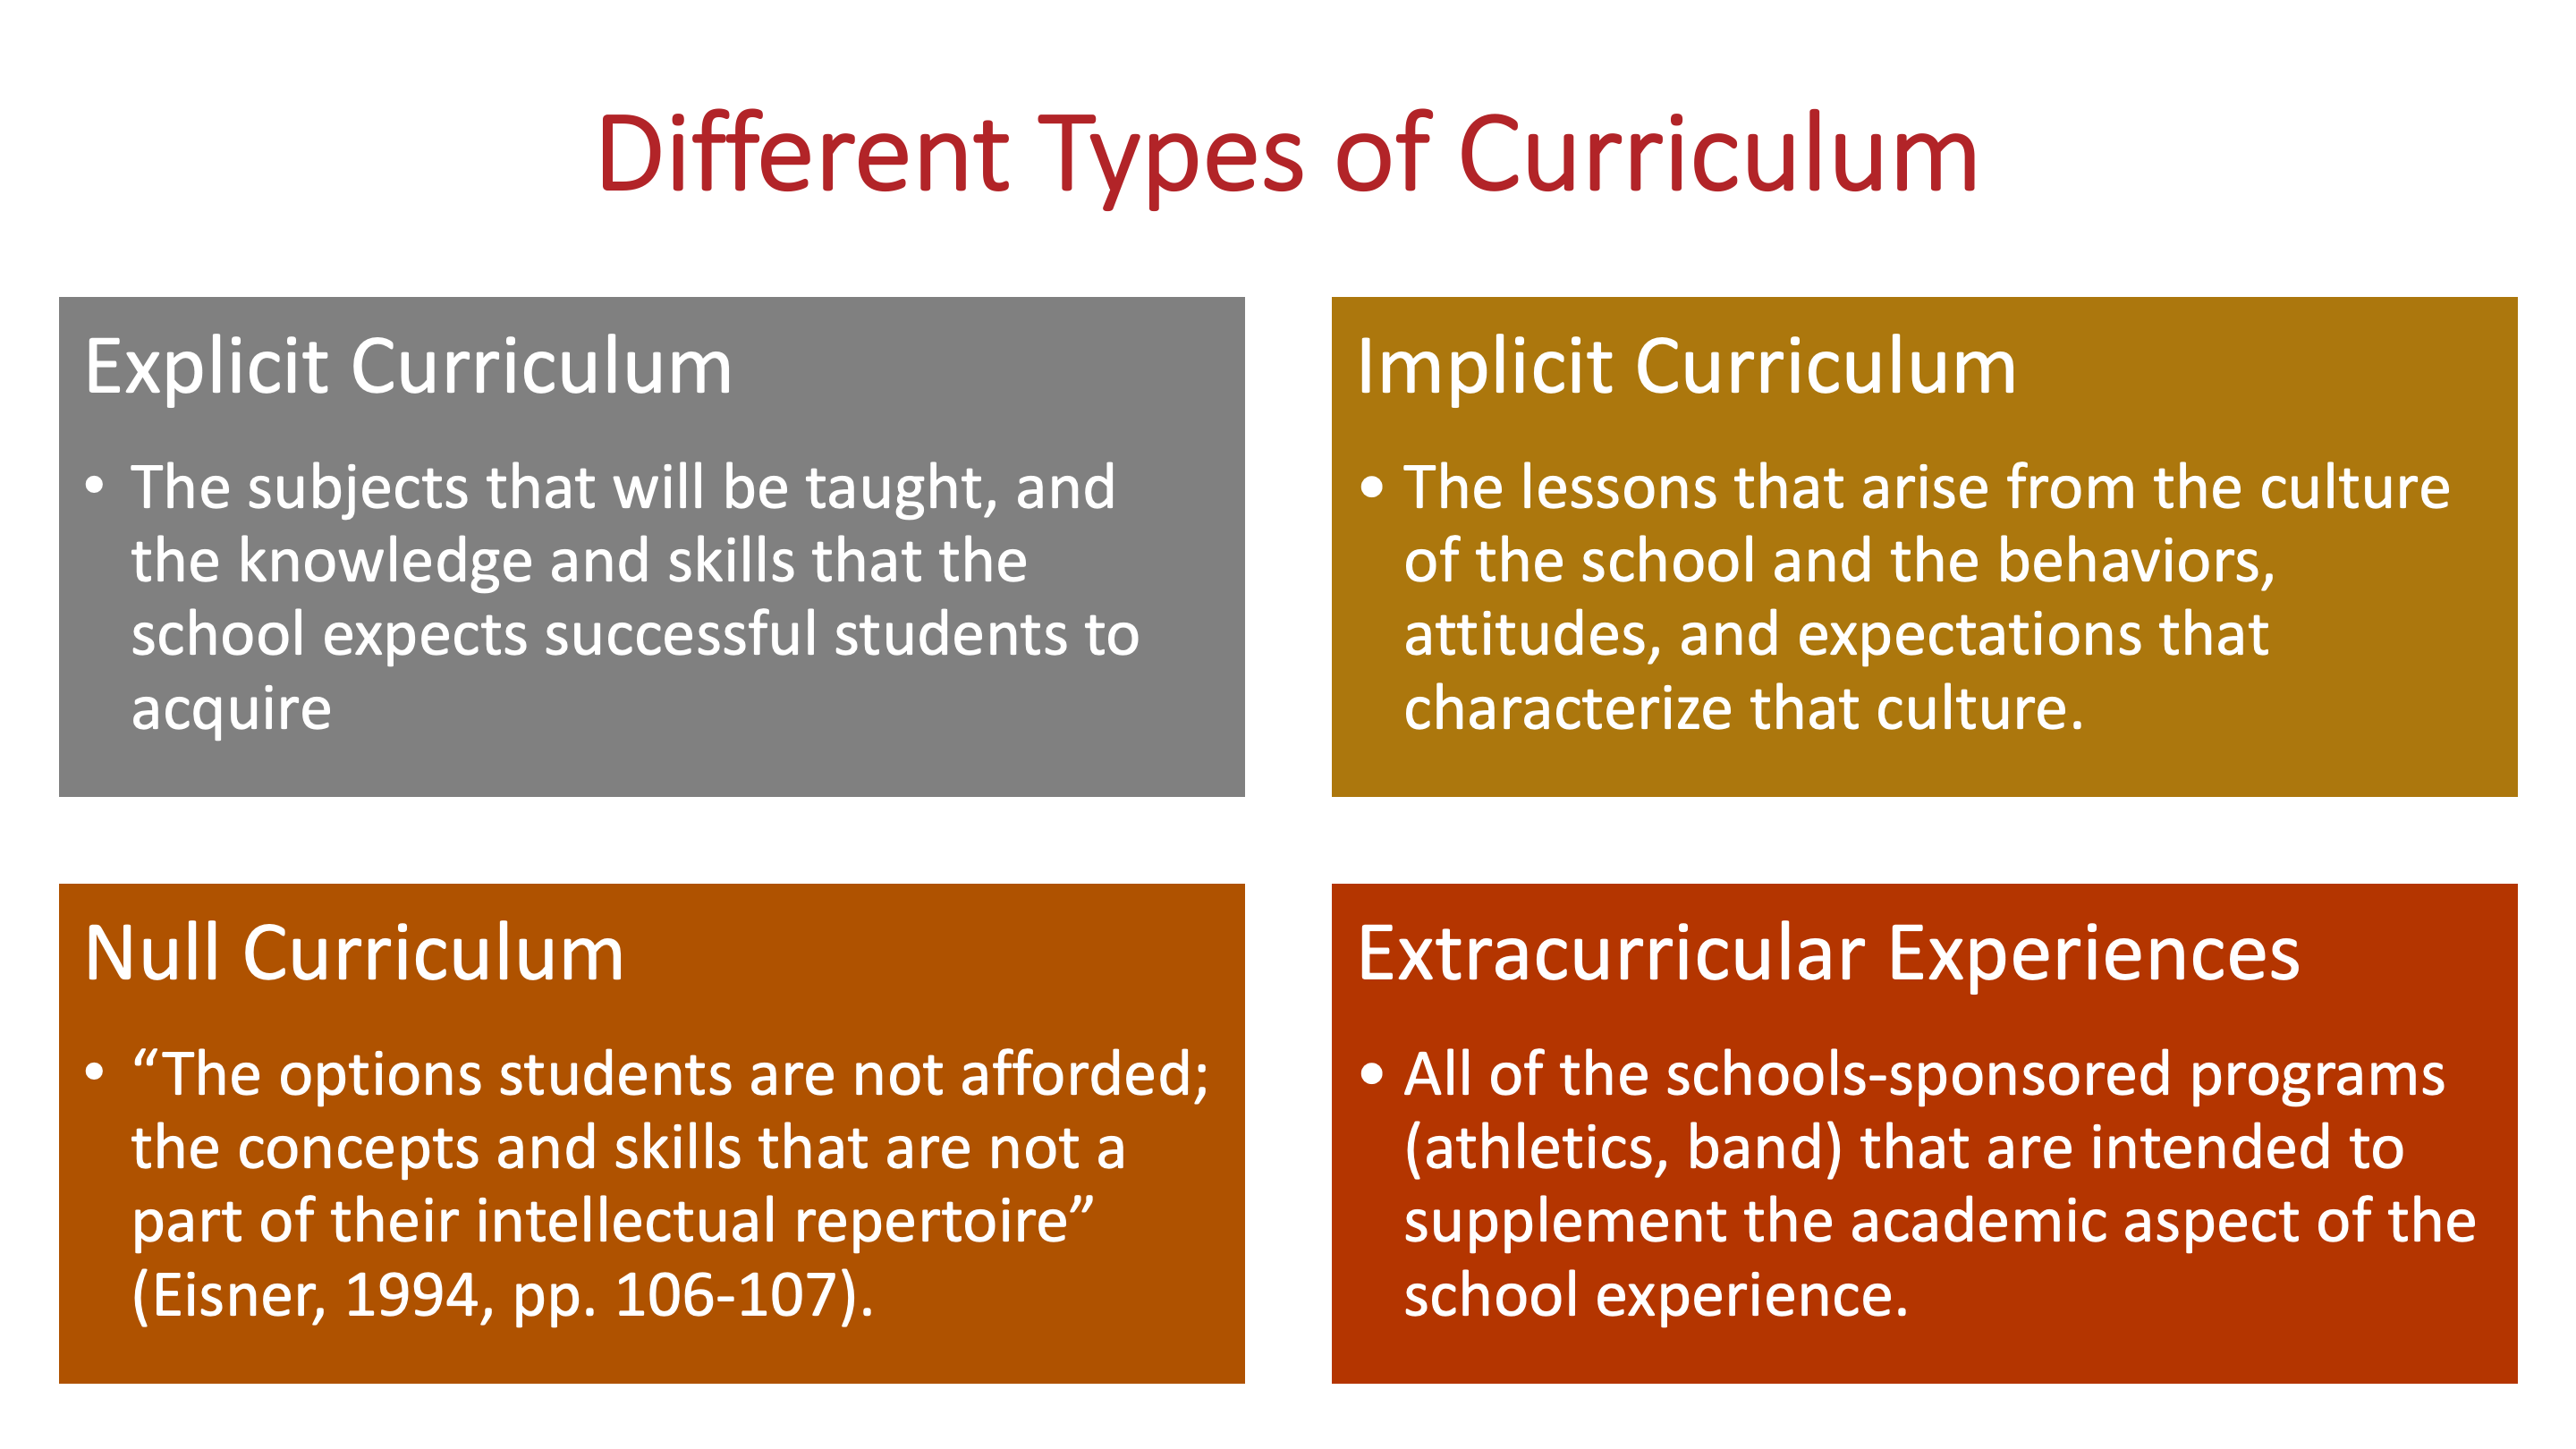 Different Types of Curriculum Explicit Curriculum The subjects that will be taught, and the knowledge and skills that the school expects successful students to acquire. Implicit Curriculum The lessons that arise from the culture of the school and the behaviors, attitudes, and expectations that characterize that culture. Null Curriculum The options students are not afforded the concepts and skills that are not a part of their intellectual repertoire. Eisner, 1994. Extracurricular Experiences All of the schools-sponsored programs (athletics, band) that are intended to supplement the academic aspect of the school experience.